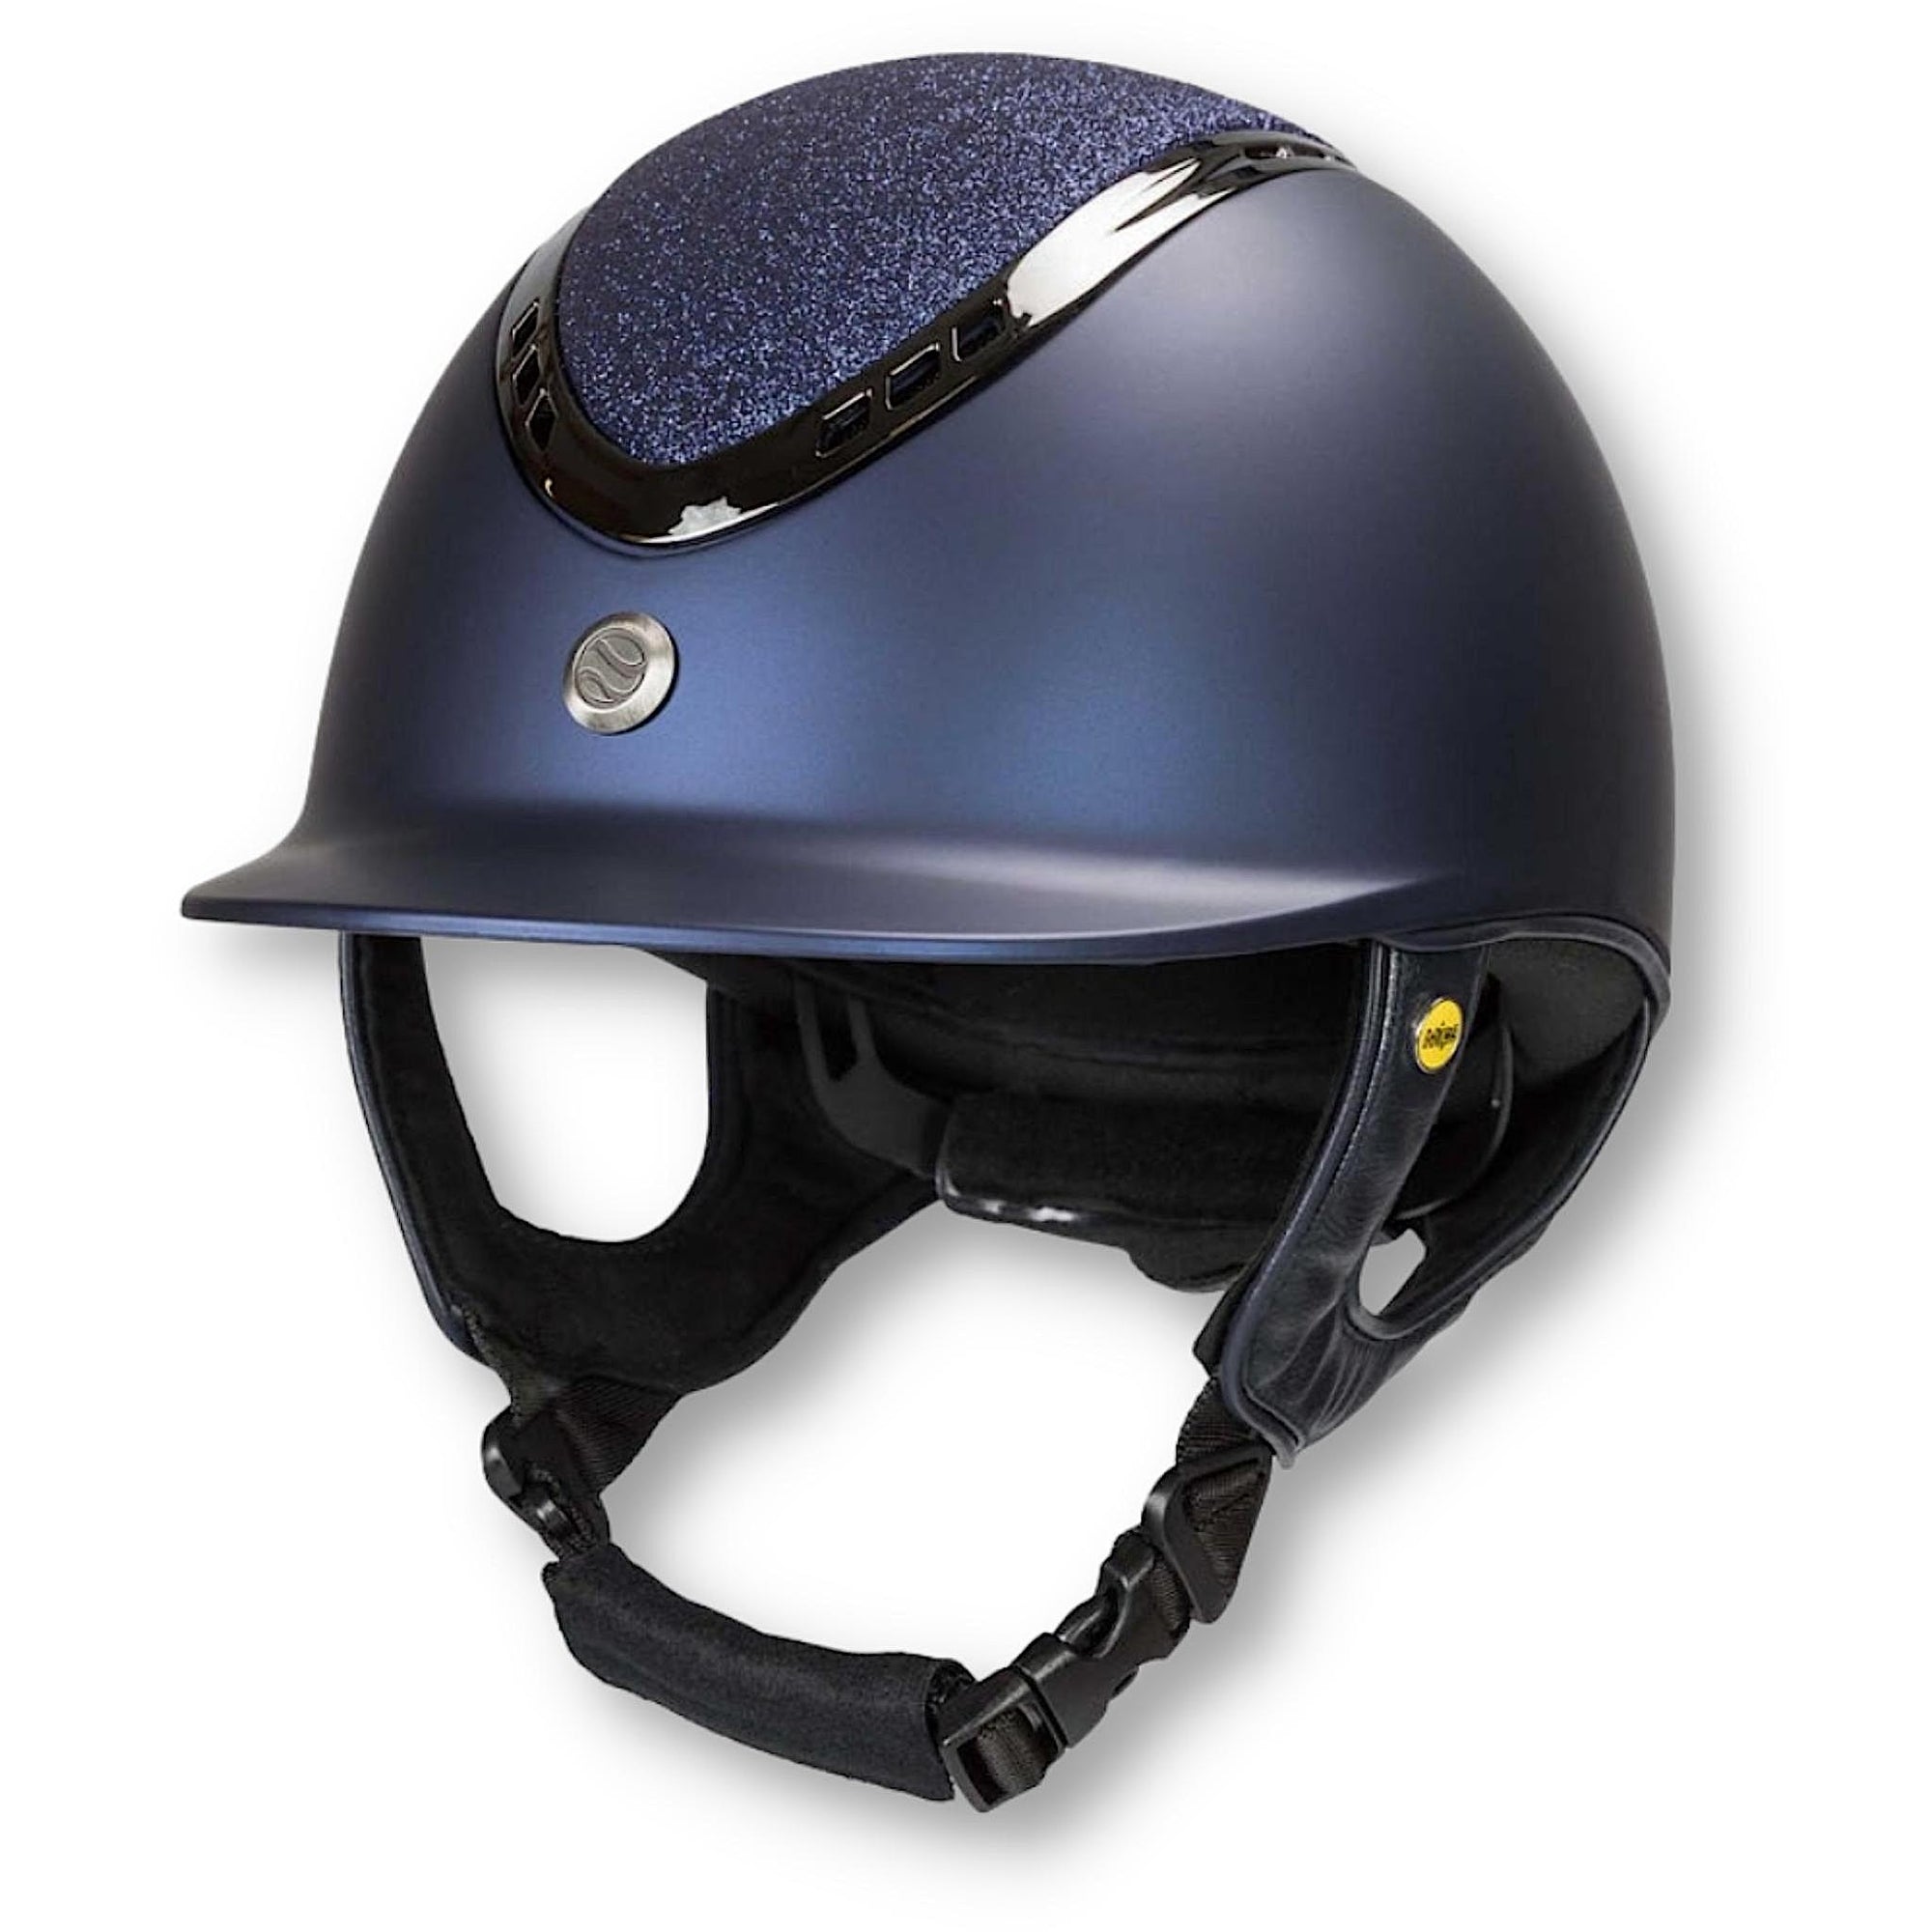 Smooth finish navy helmet with navy glitter on top and black details.